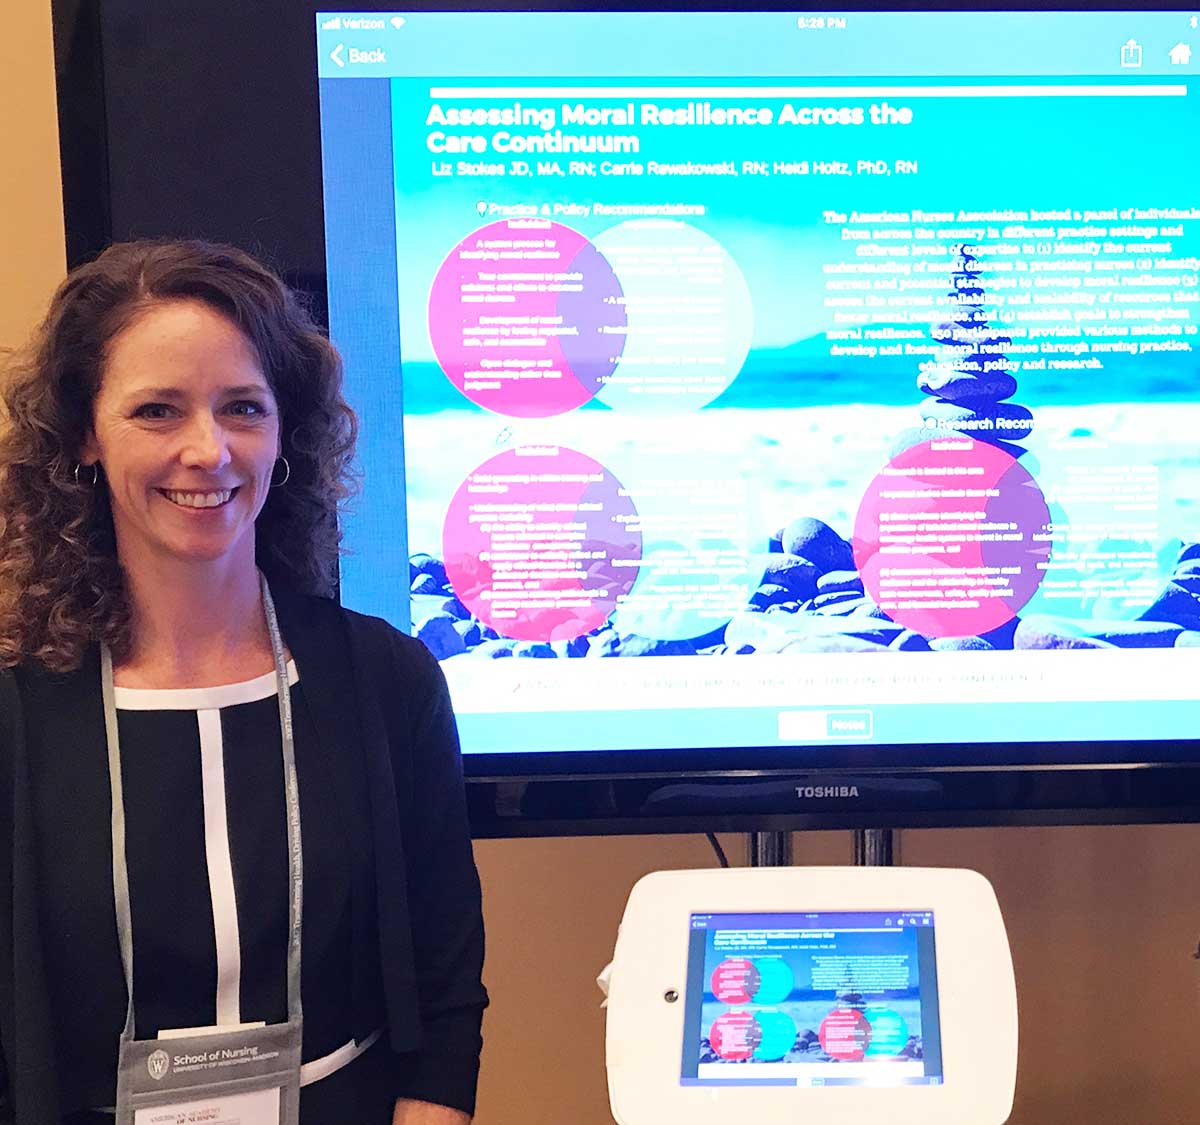 Carrie Rewakowski, a doctoral student in the Decker School of Nursing, presented work she and a team of researchers completed on moral resiliency at the 2017 American Academy of Nursing Conference.